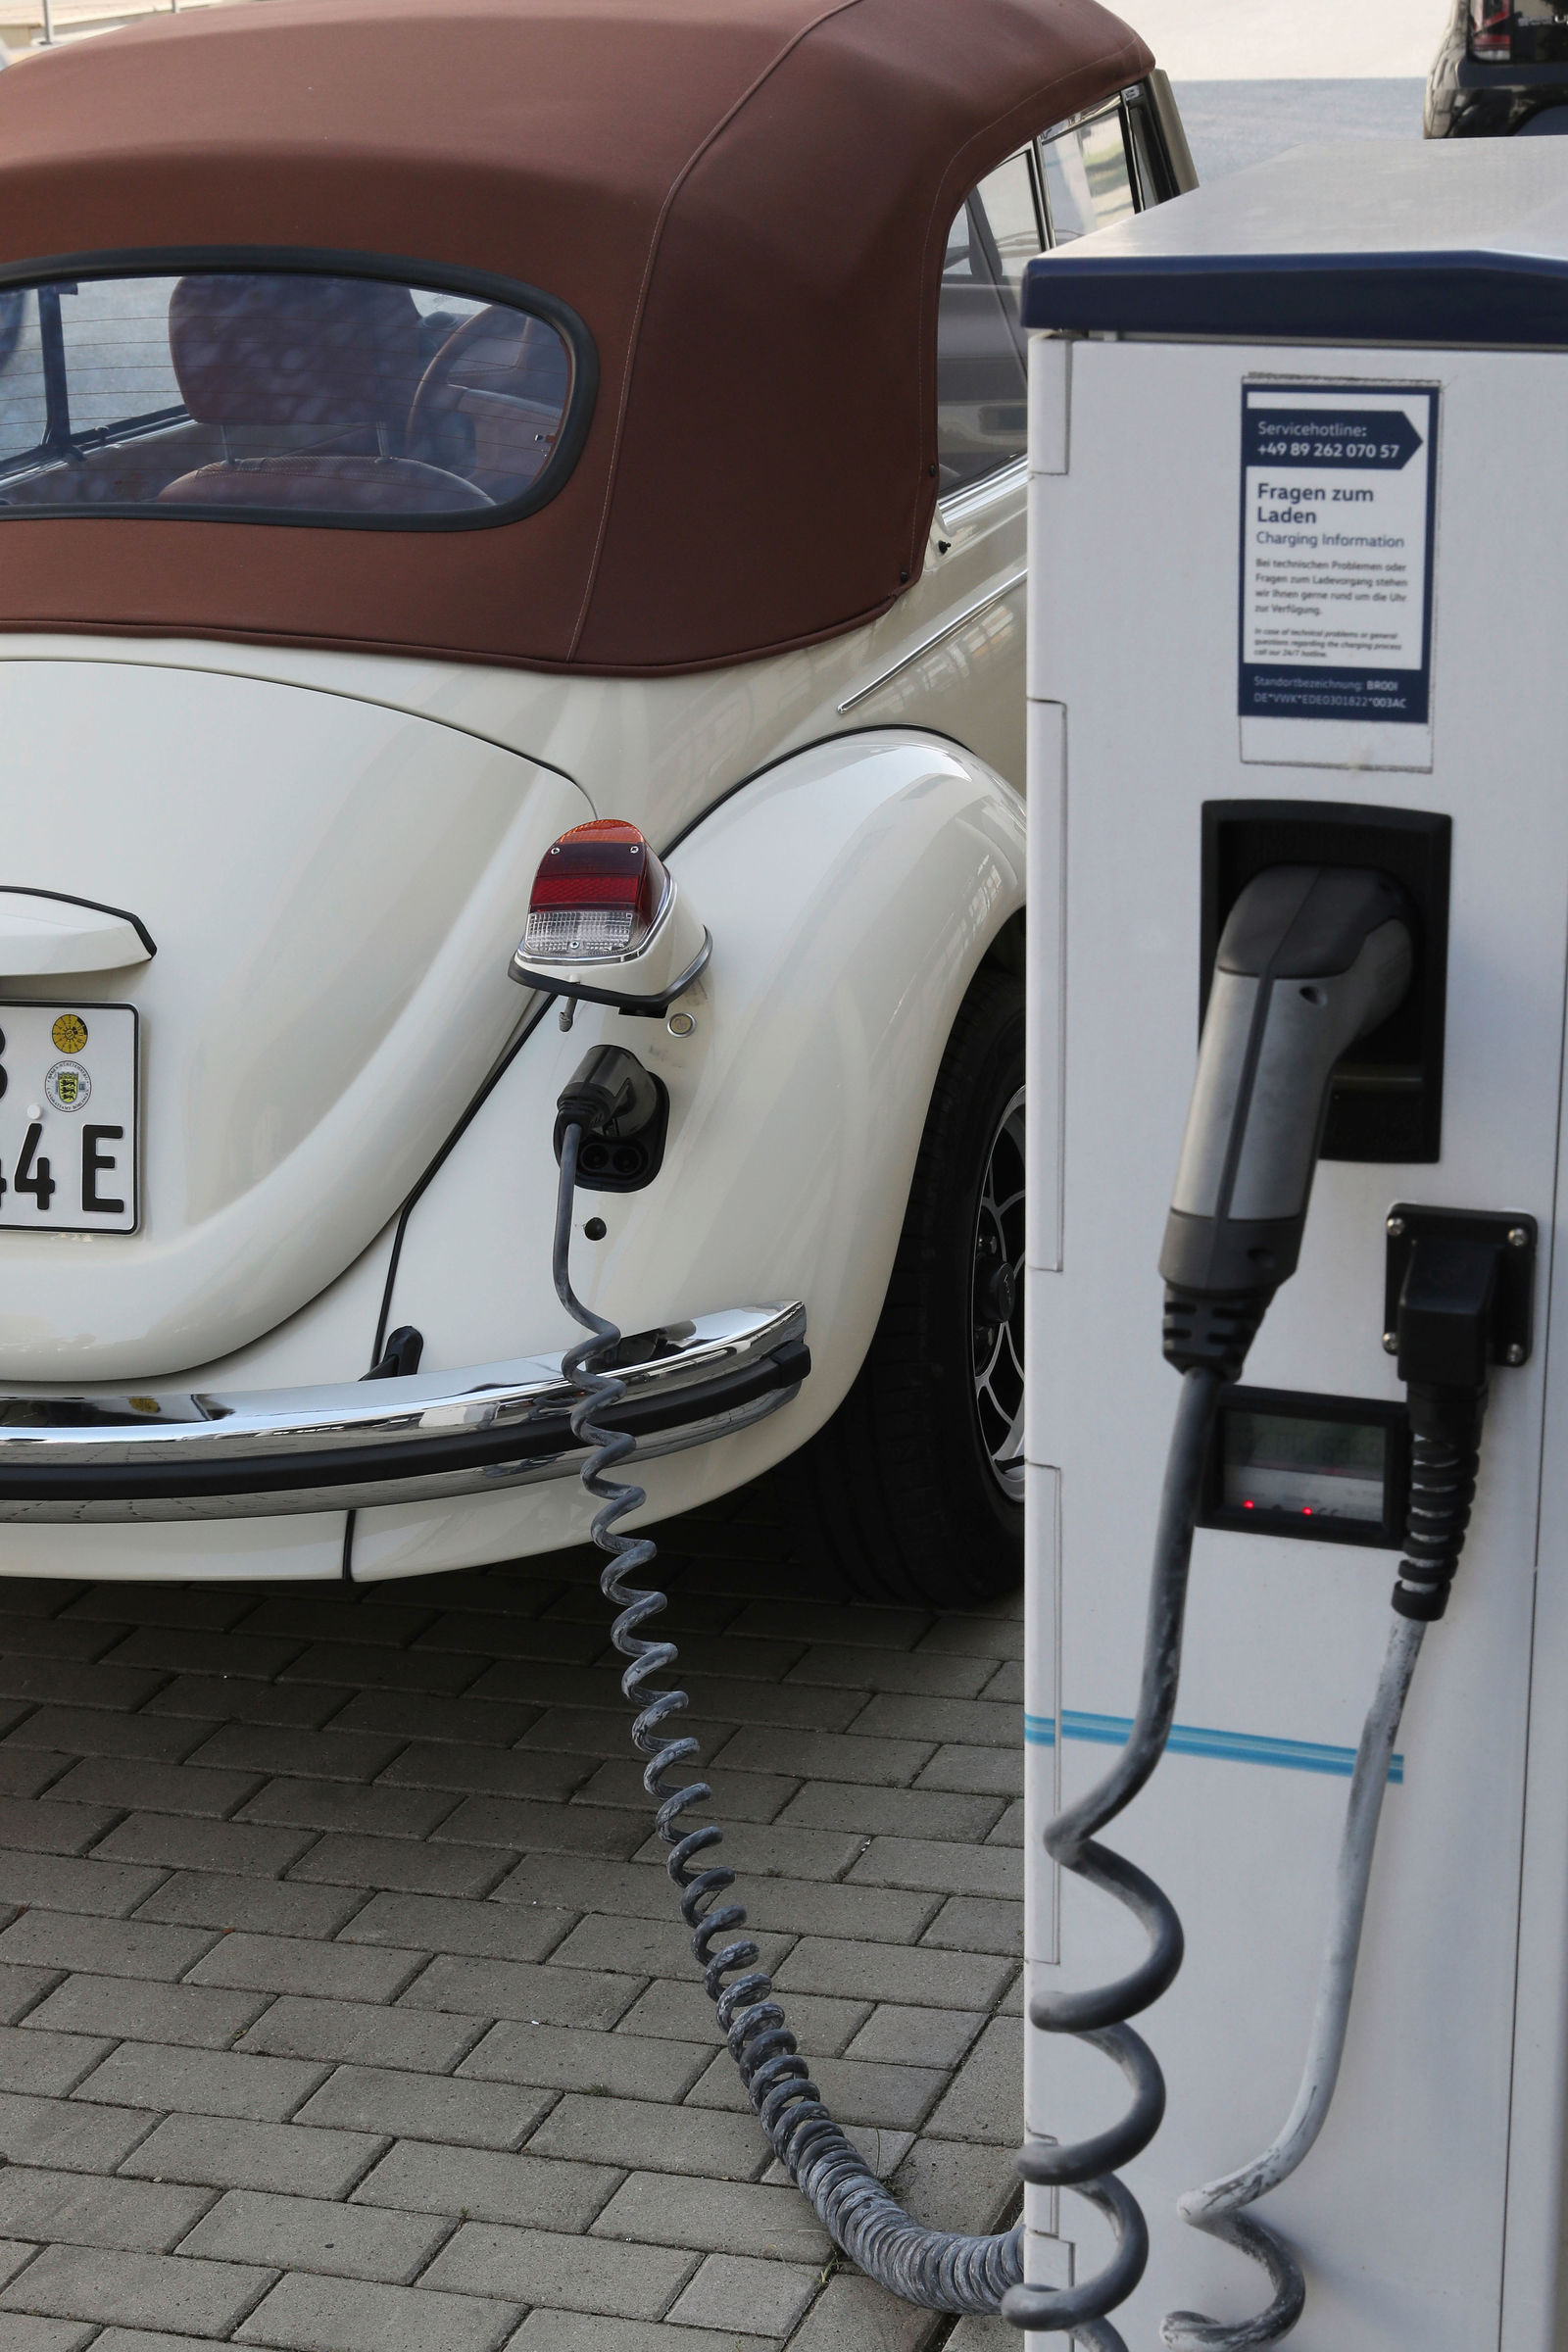 The e-Beetle is being charged